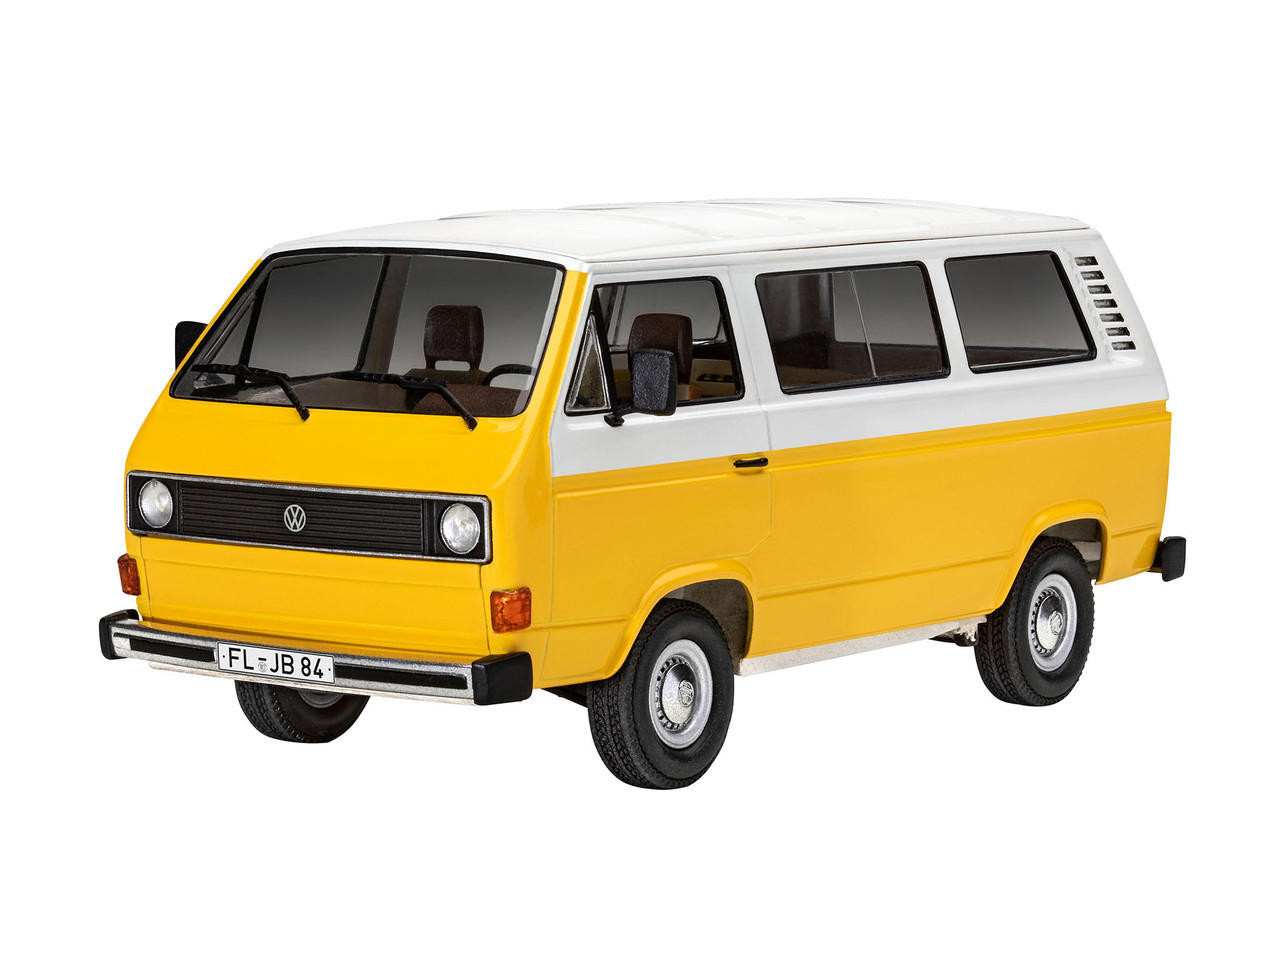 Revell Vw T2 Bus 1:24 Scale Model Kit With New Tool